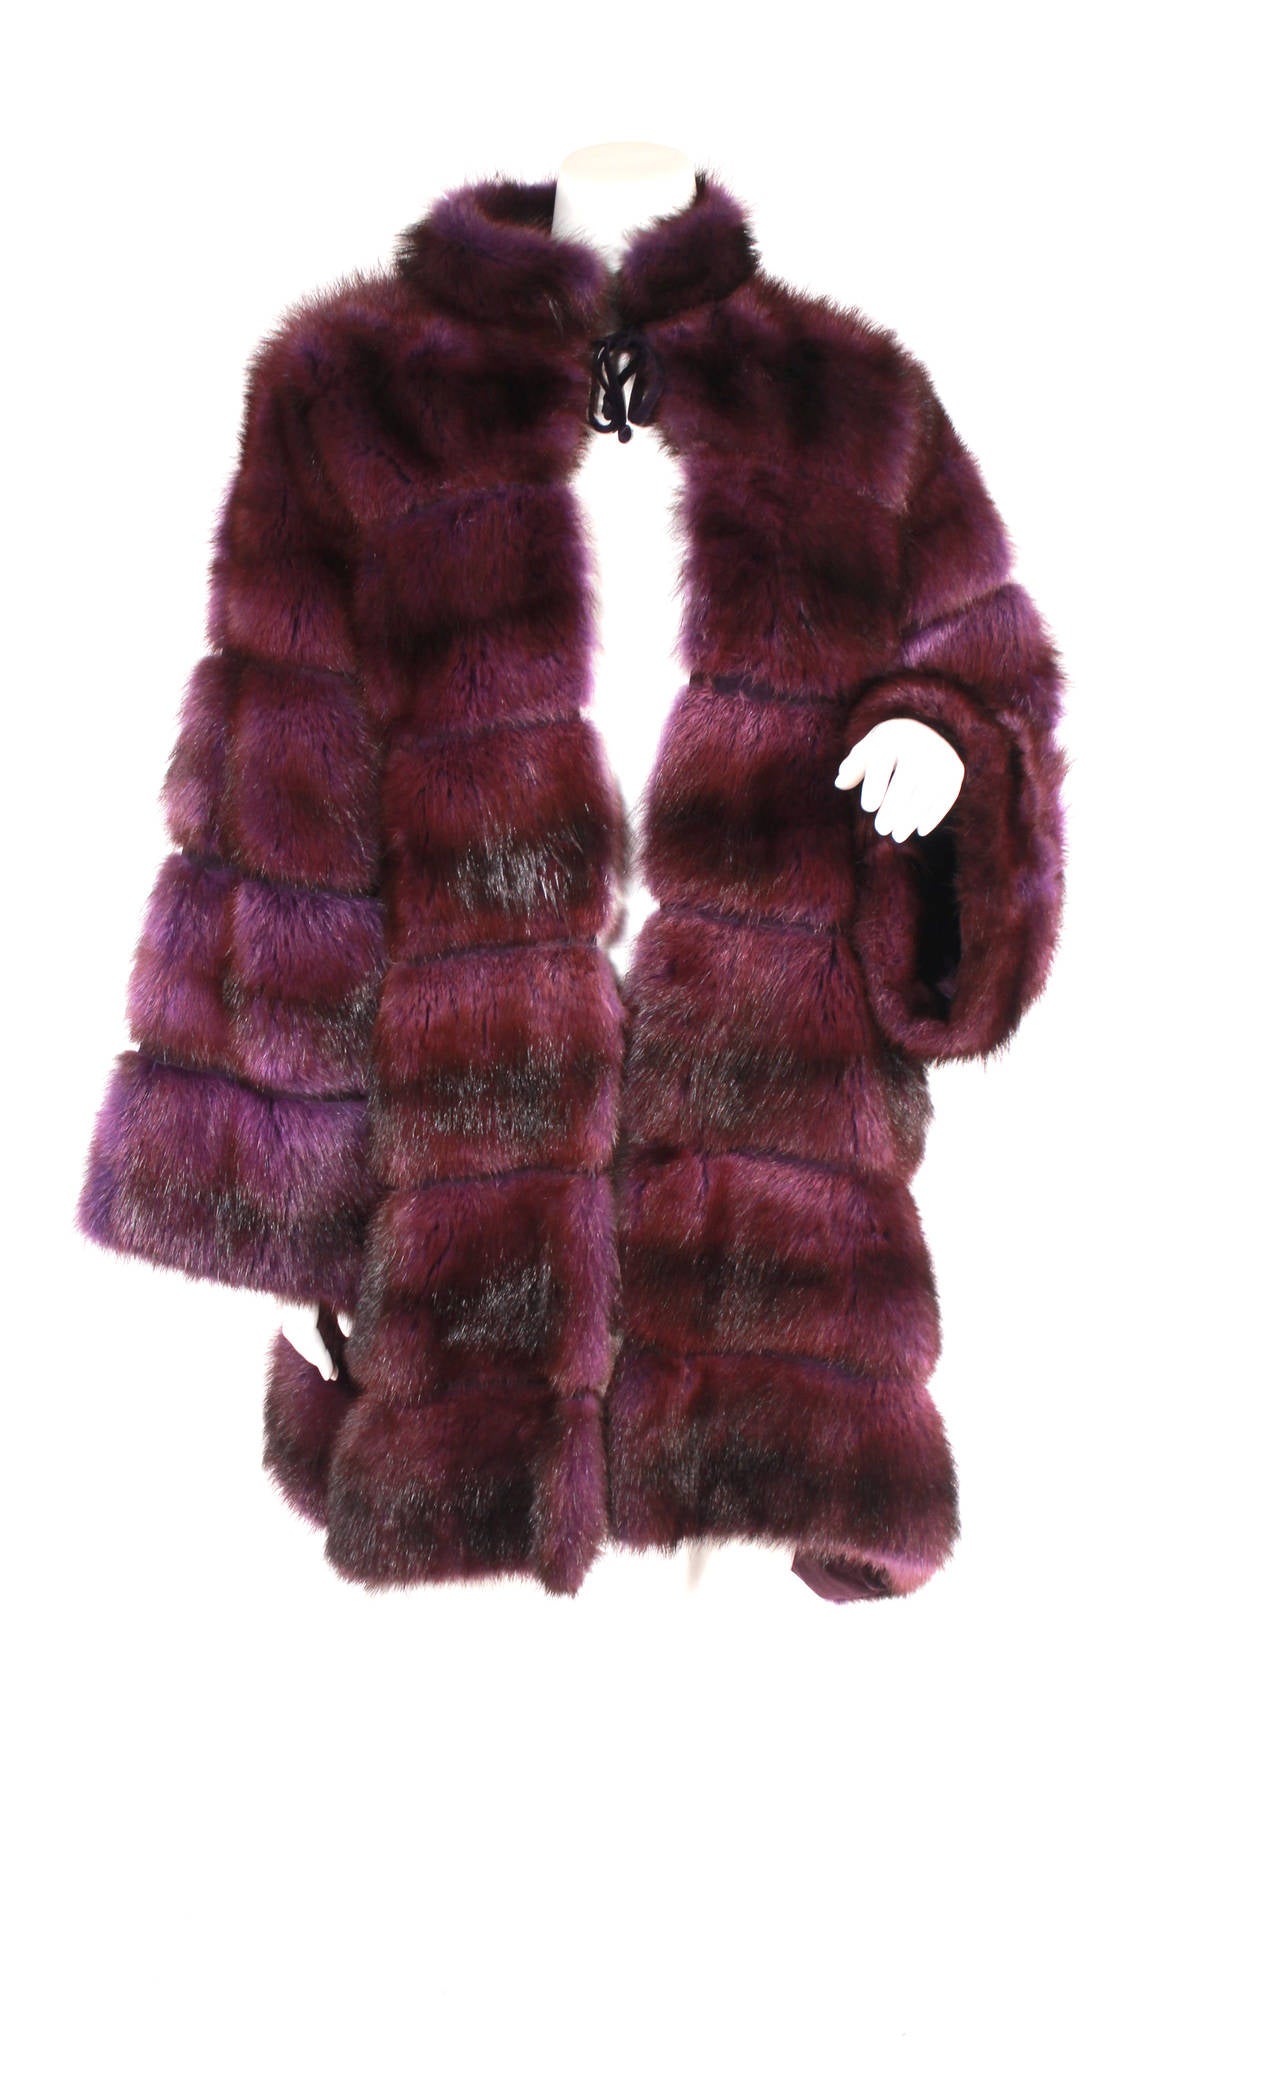 Carlo Tivioli Purple Mink Coat. Gorgeous deep purple mink, excellent condition. Tie closure at the collar. Has a nice swing quality, longer on the back sides.

Originally owned by the famed singer and night club owner Regine Zylberberg from Paris,